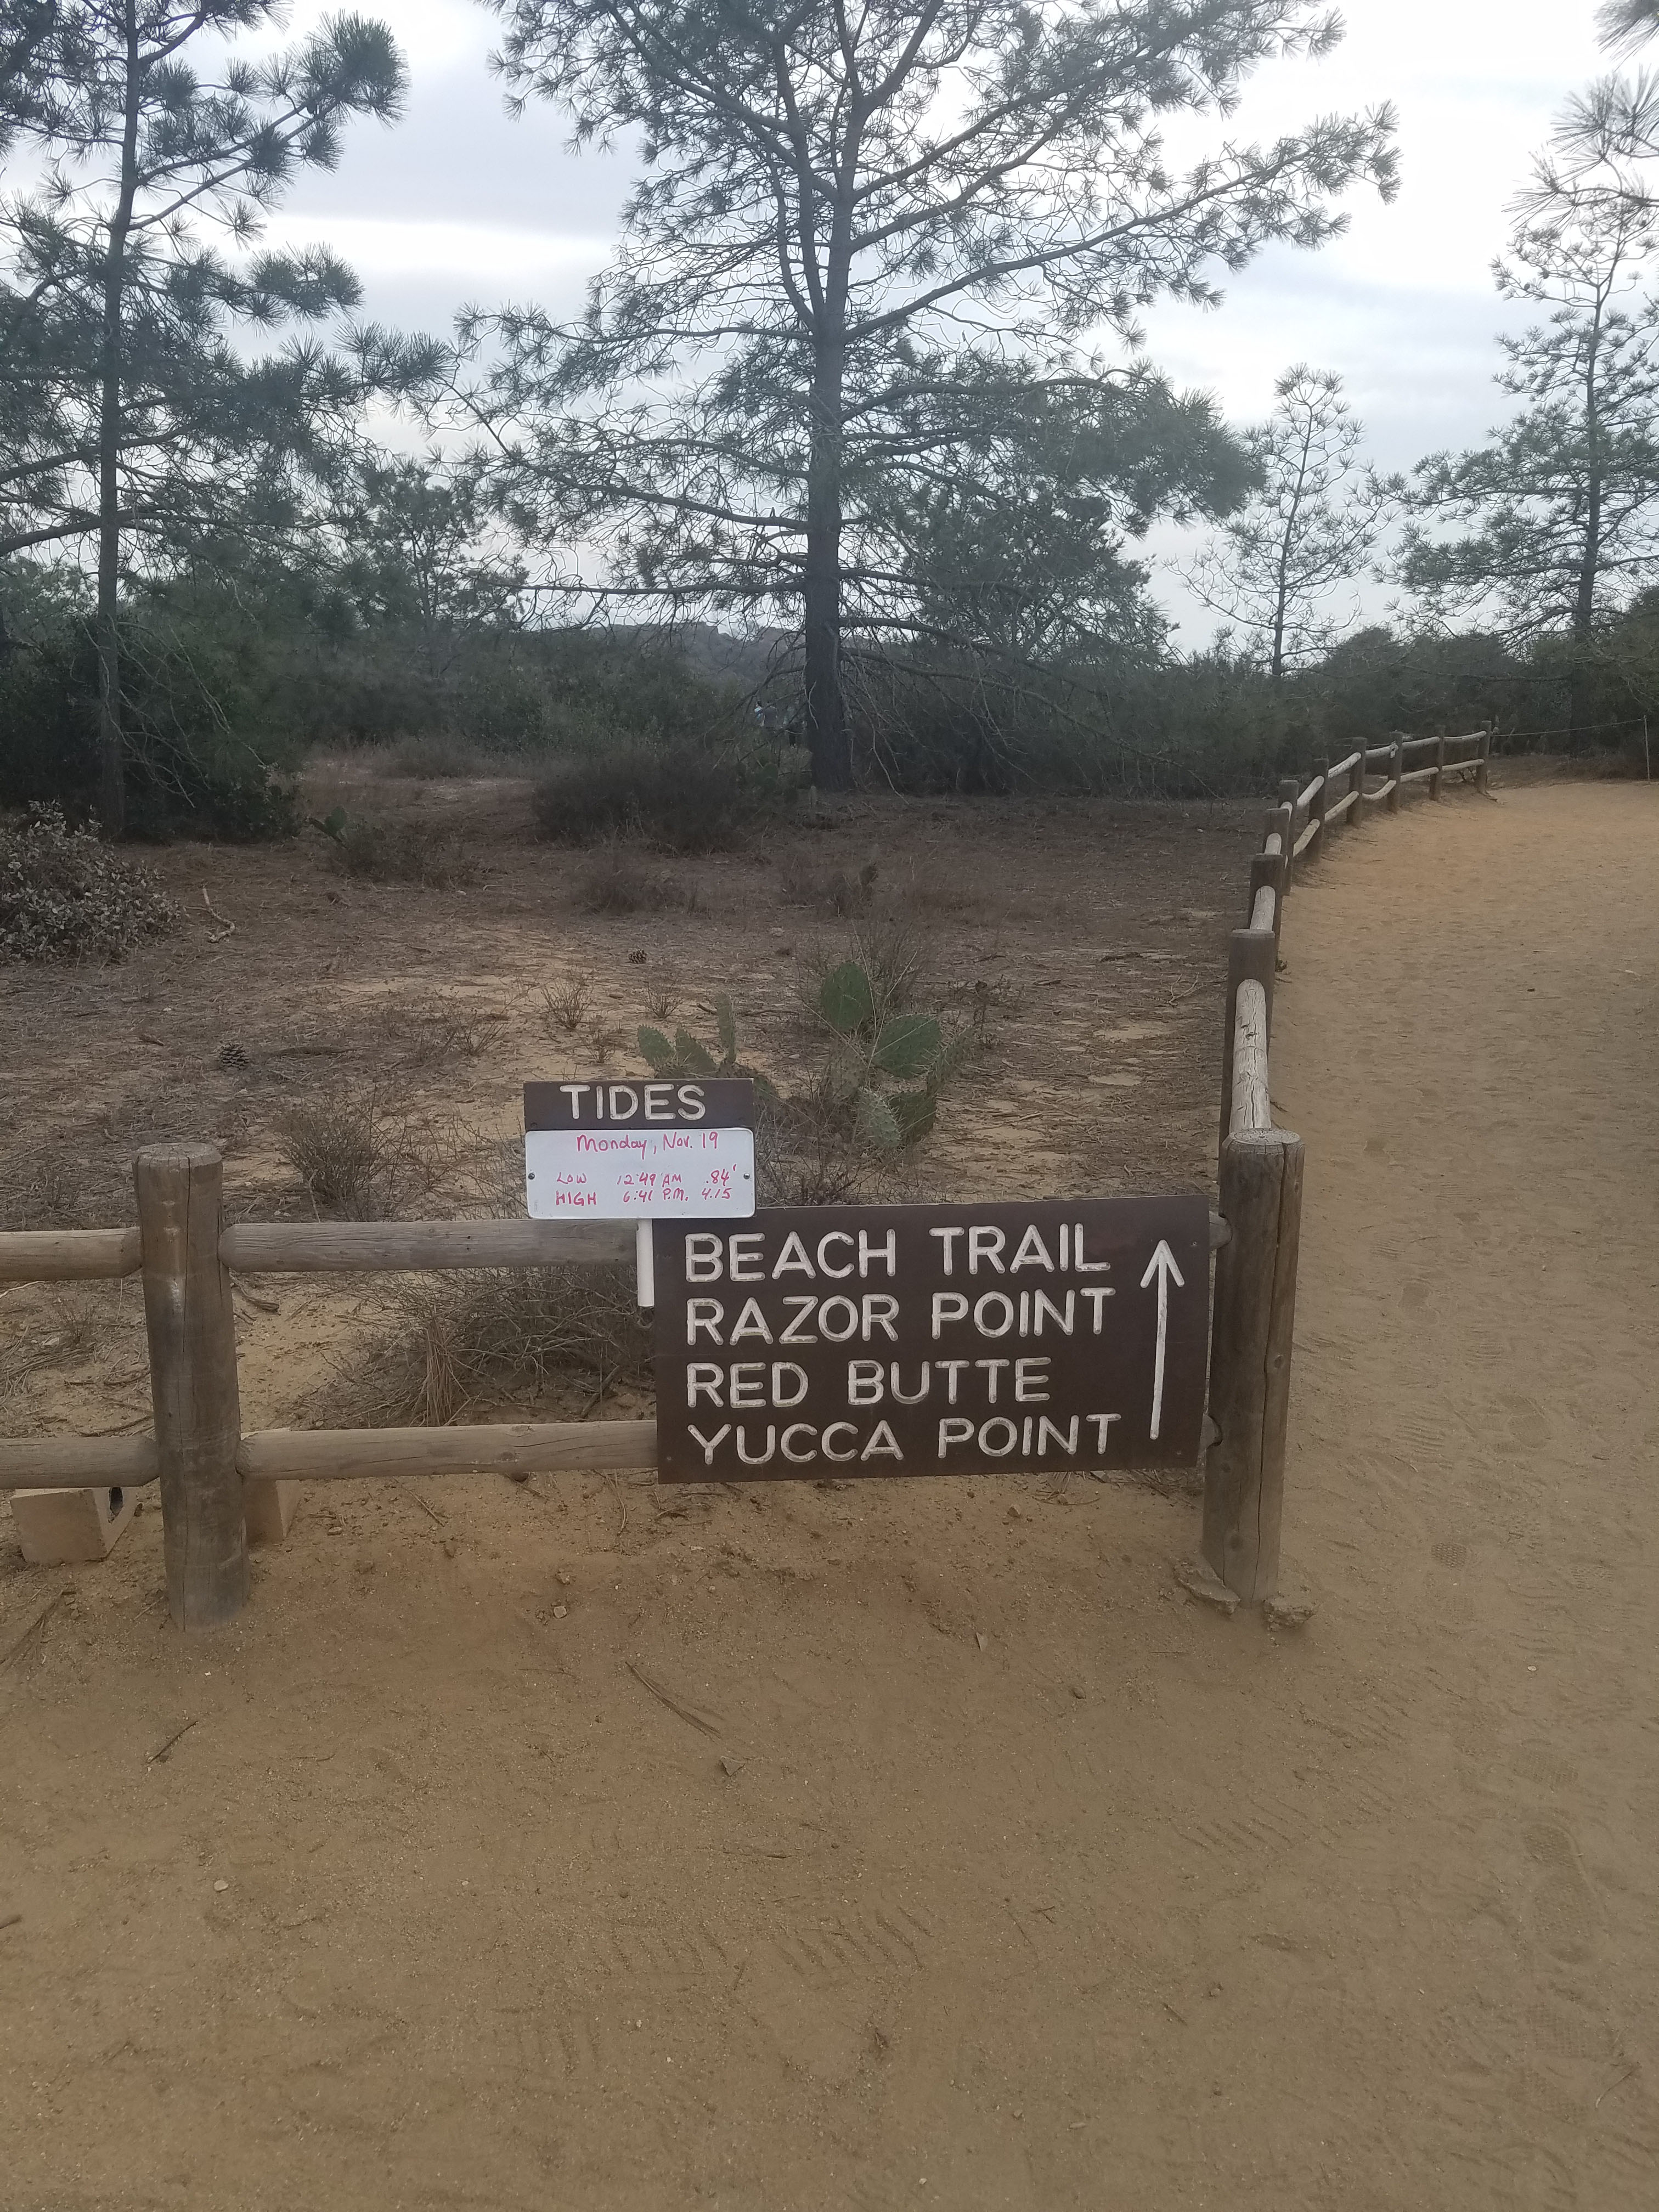 Red Butte, Razor Point Trail, and Yucca Point Trail